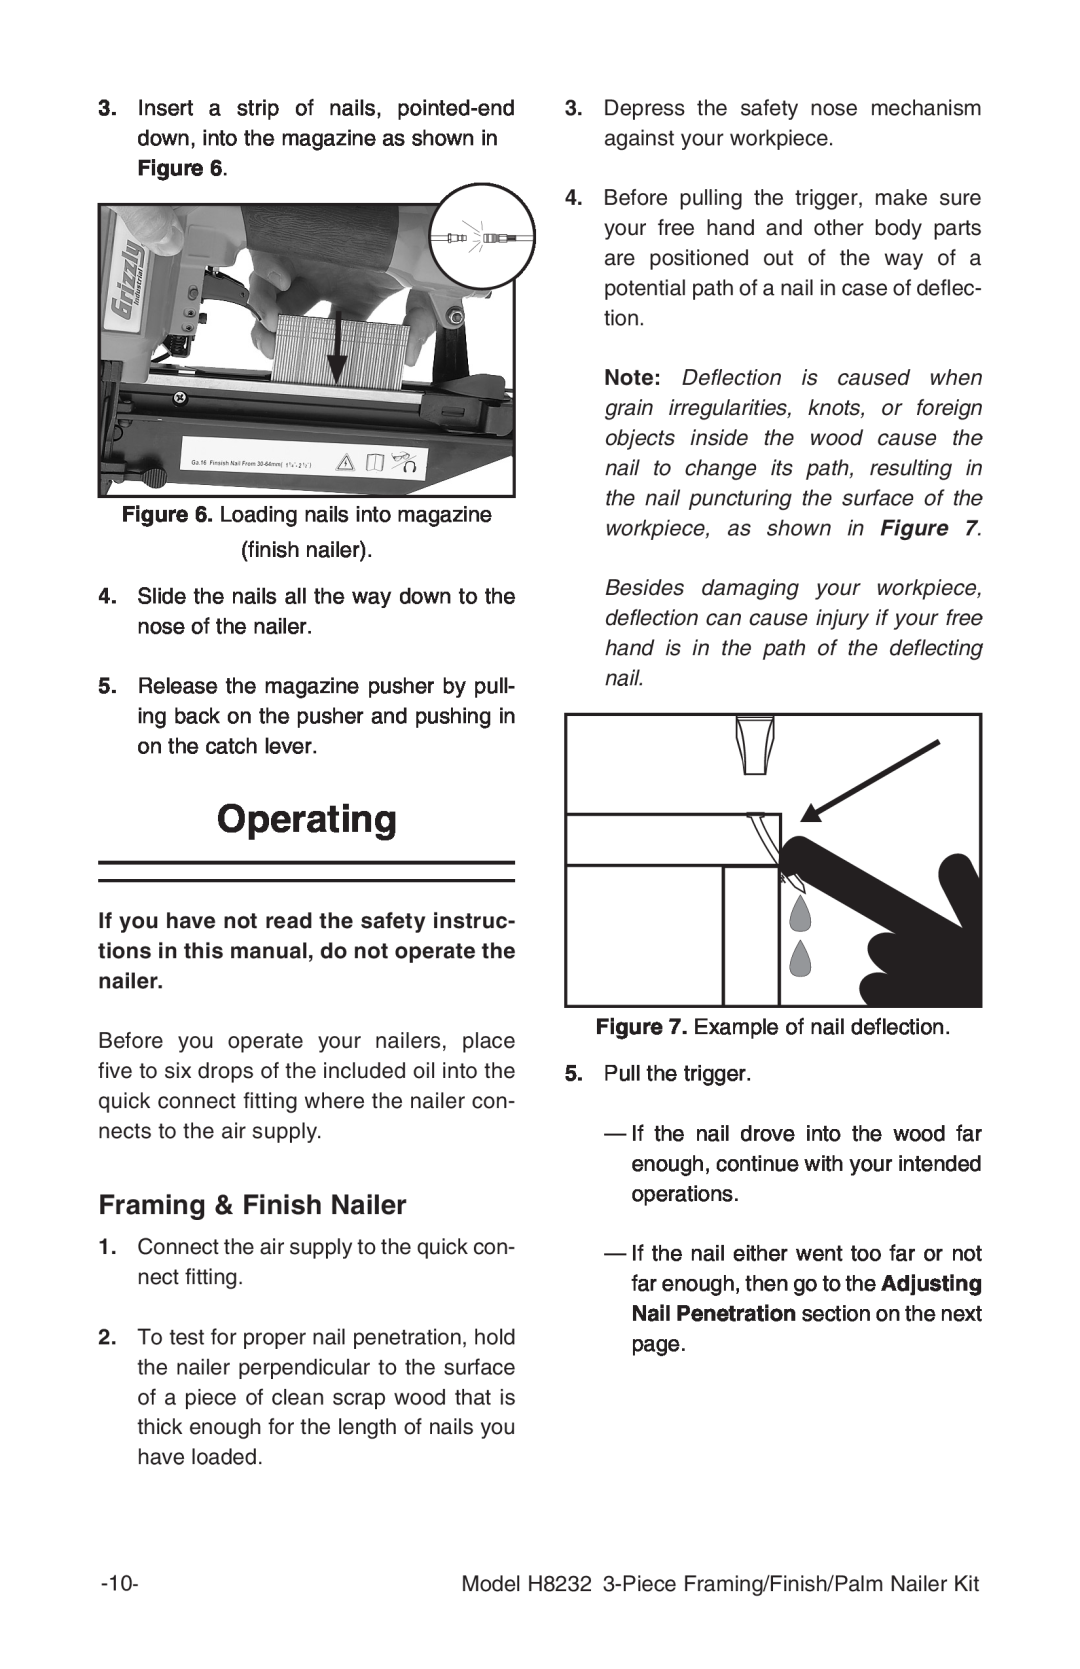 Grizzly H8232 owner manual Operating, Framing & Finish Nailer 